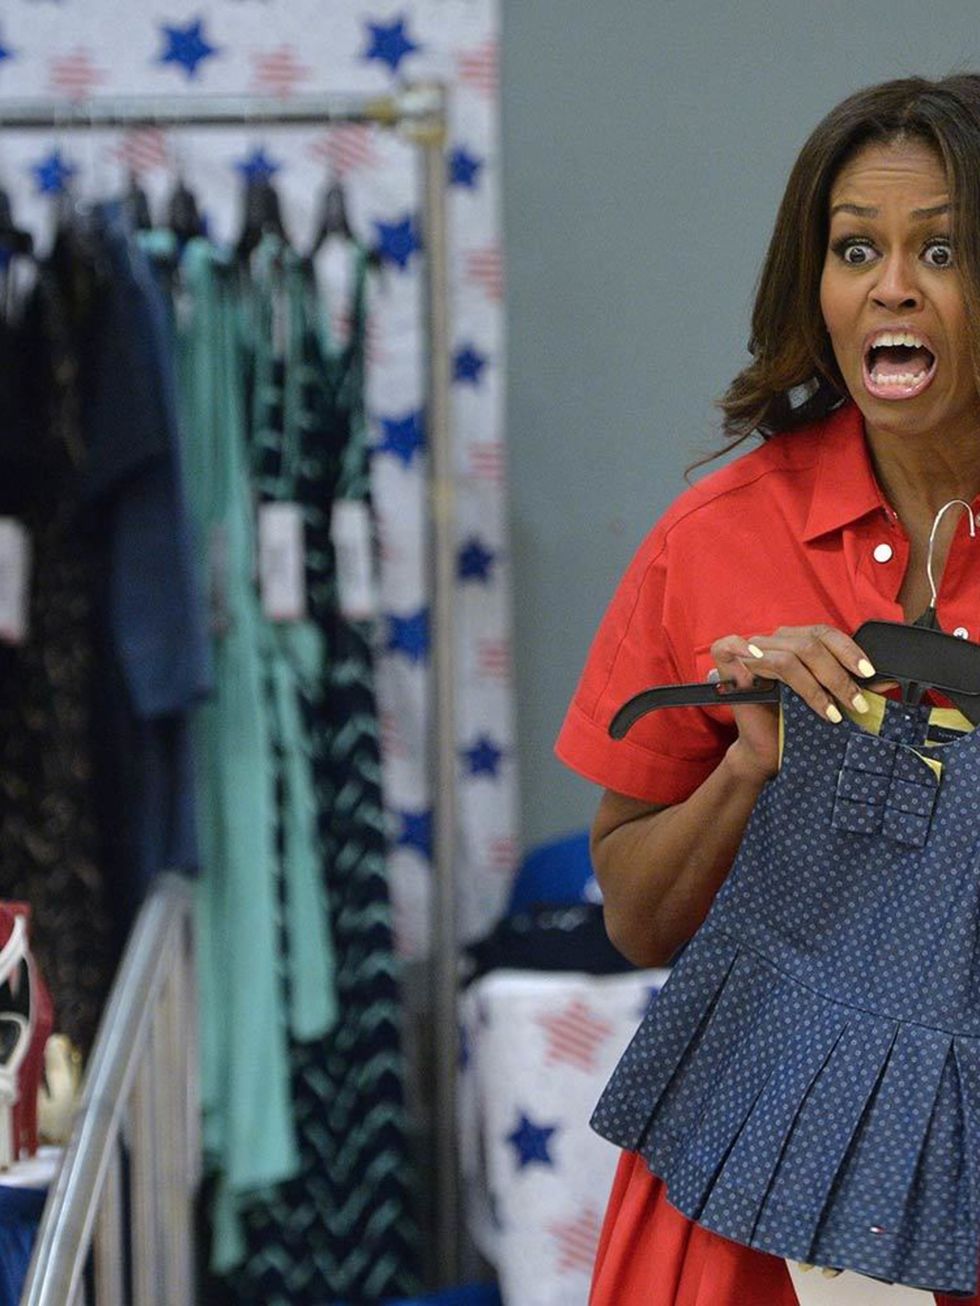 Michelle Obama holds children's clothing as she meets with women expecting babies at the United States and Nato military base in Aviano, Italy, June 2015.